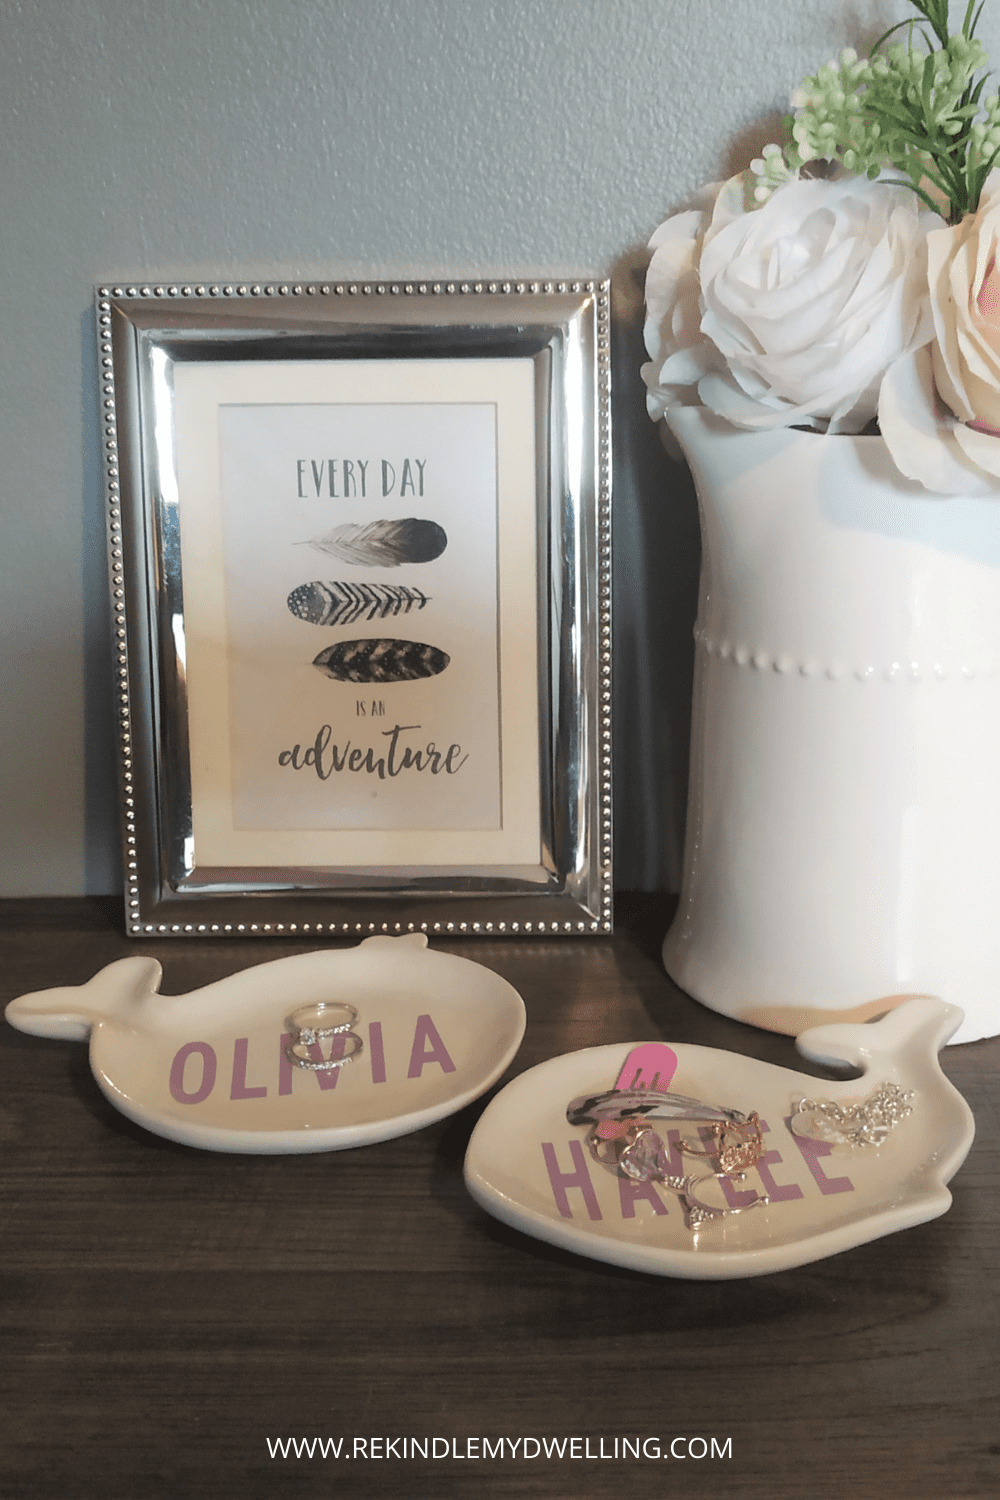 Personalized trinket dishes next to a vase with flowers and a picture frame.